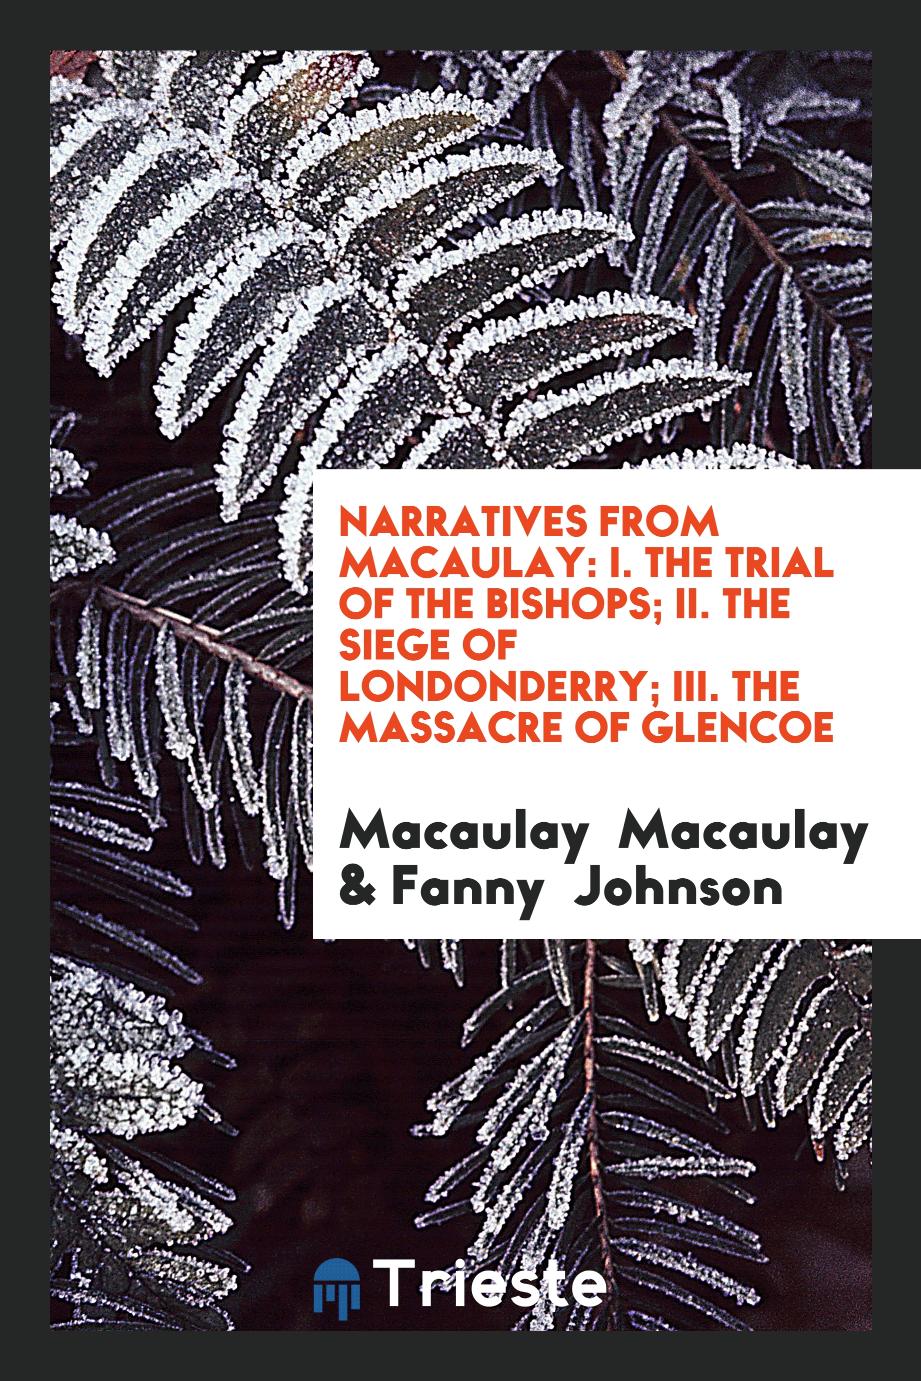 Narratives from Macaulay: I. The Trial of the Bishops; II. The Siege of Londonderry; III. The Massacre of Glencoe